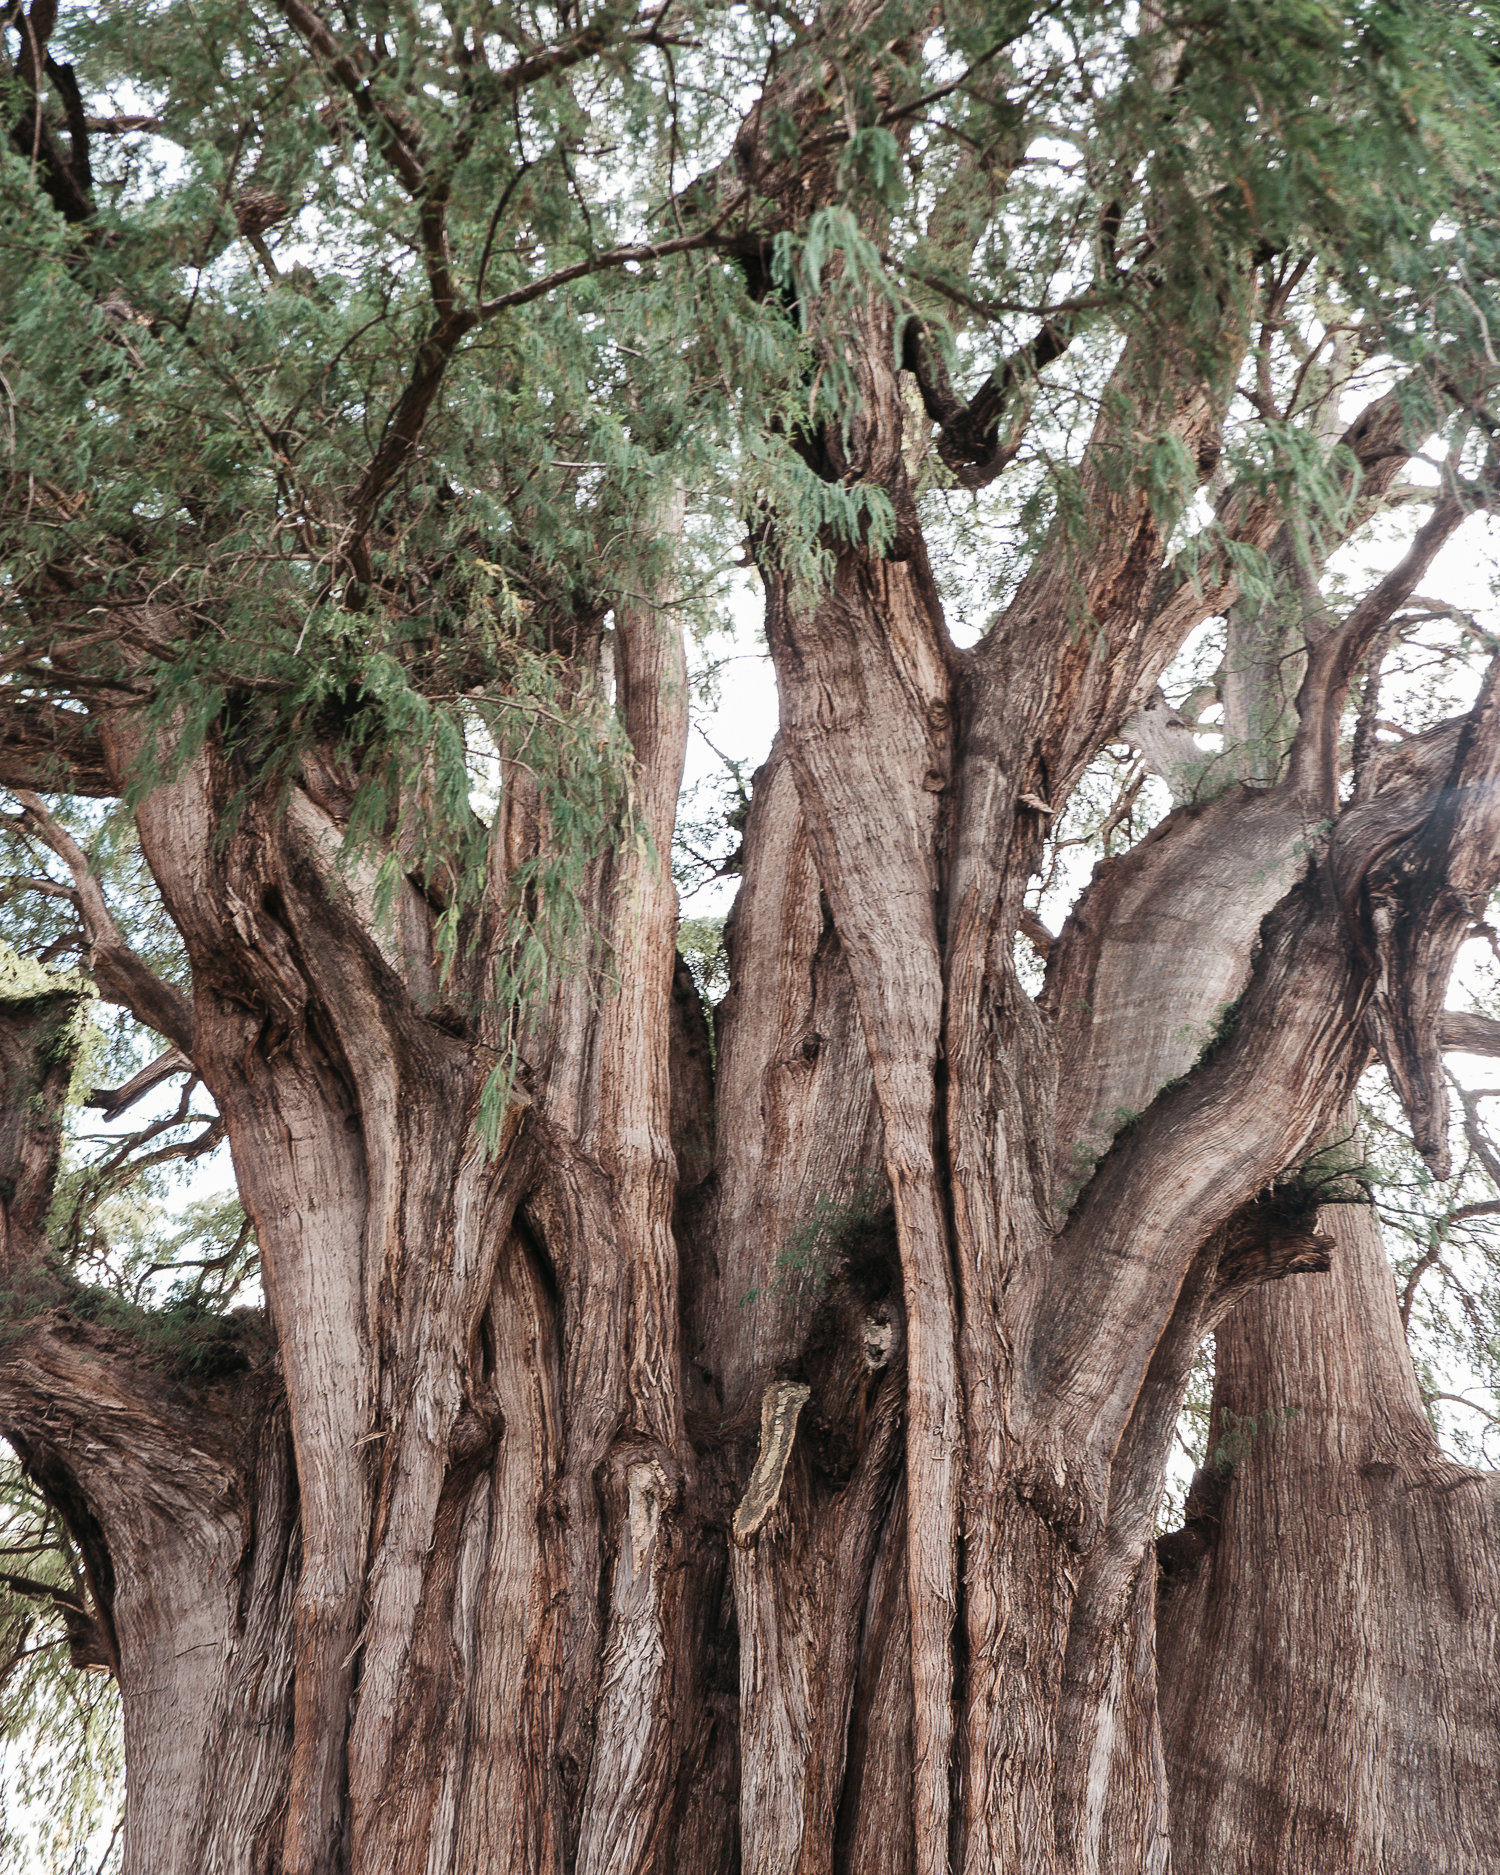 Go to Santa Maria del Tule to see widest tree of the world